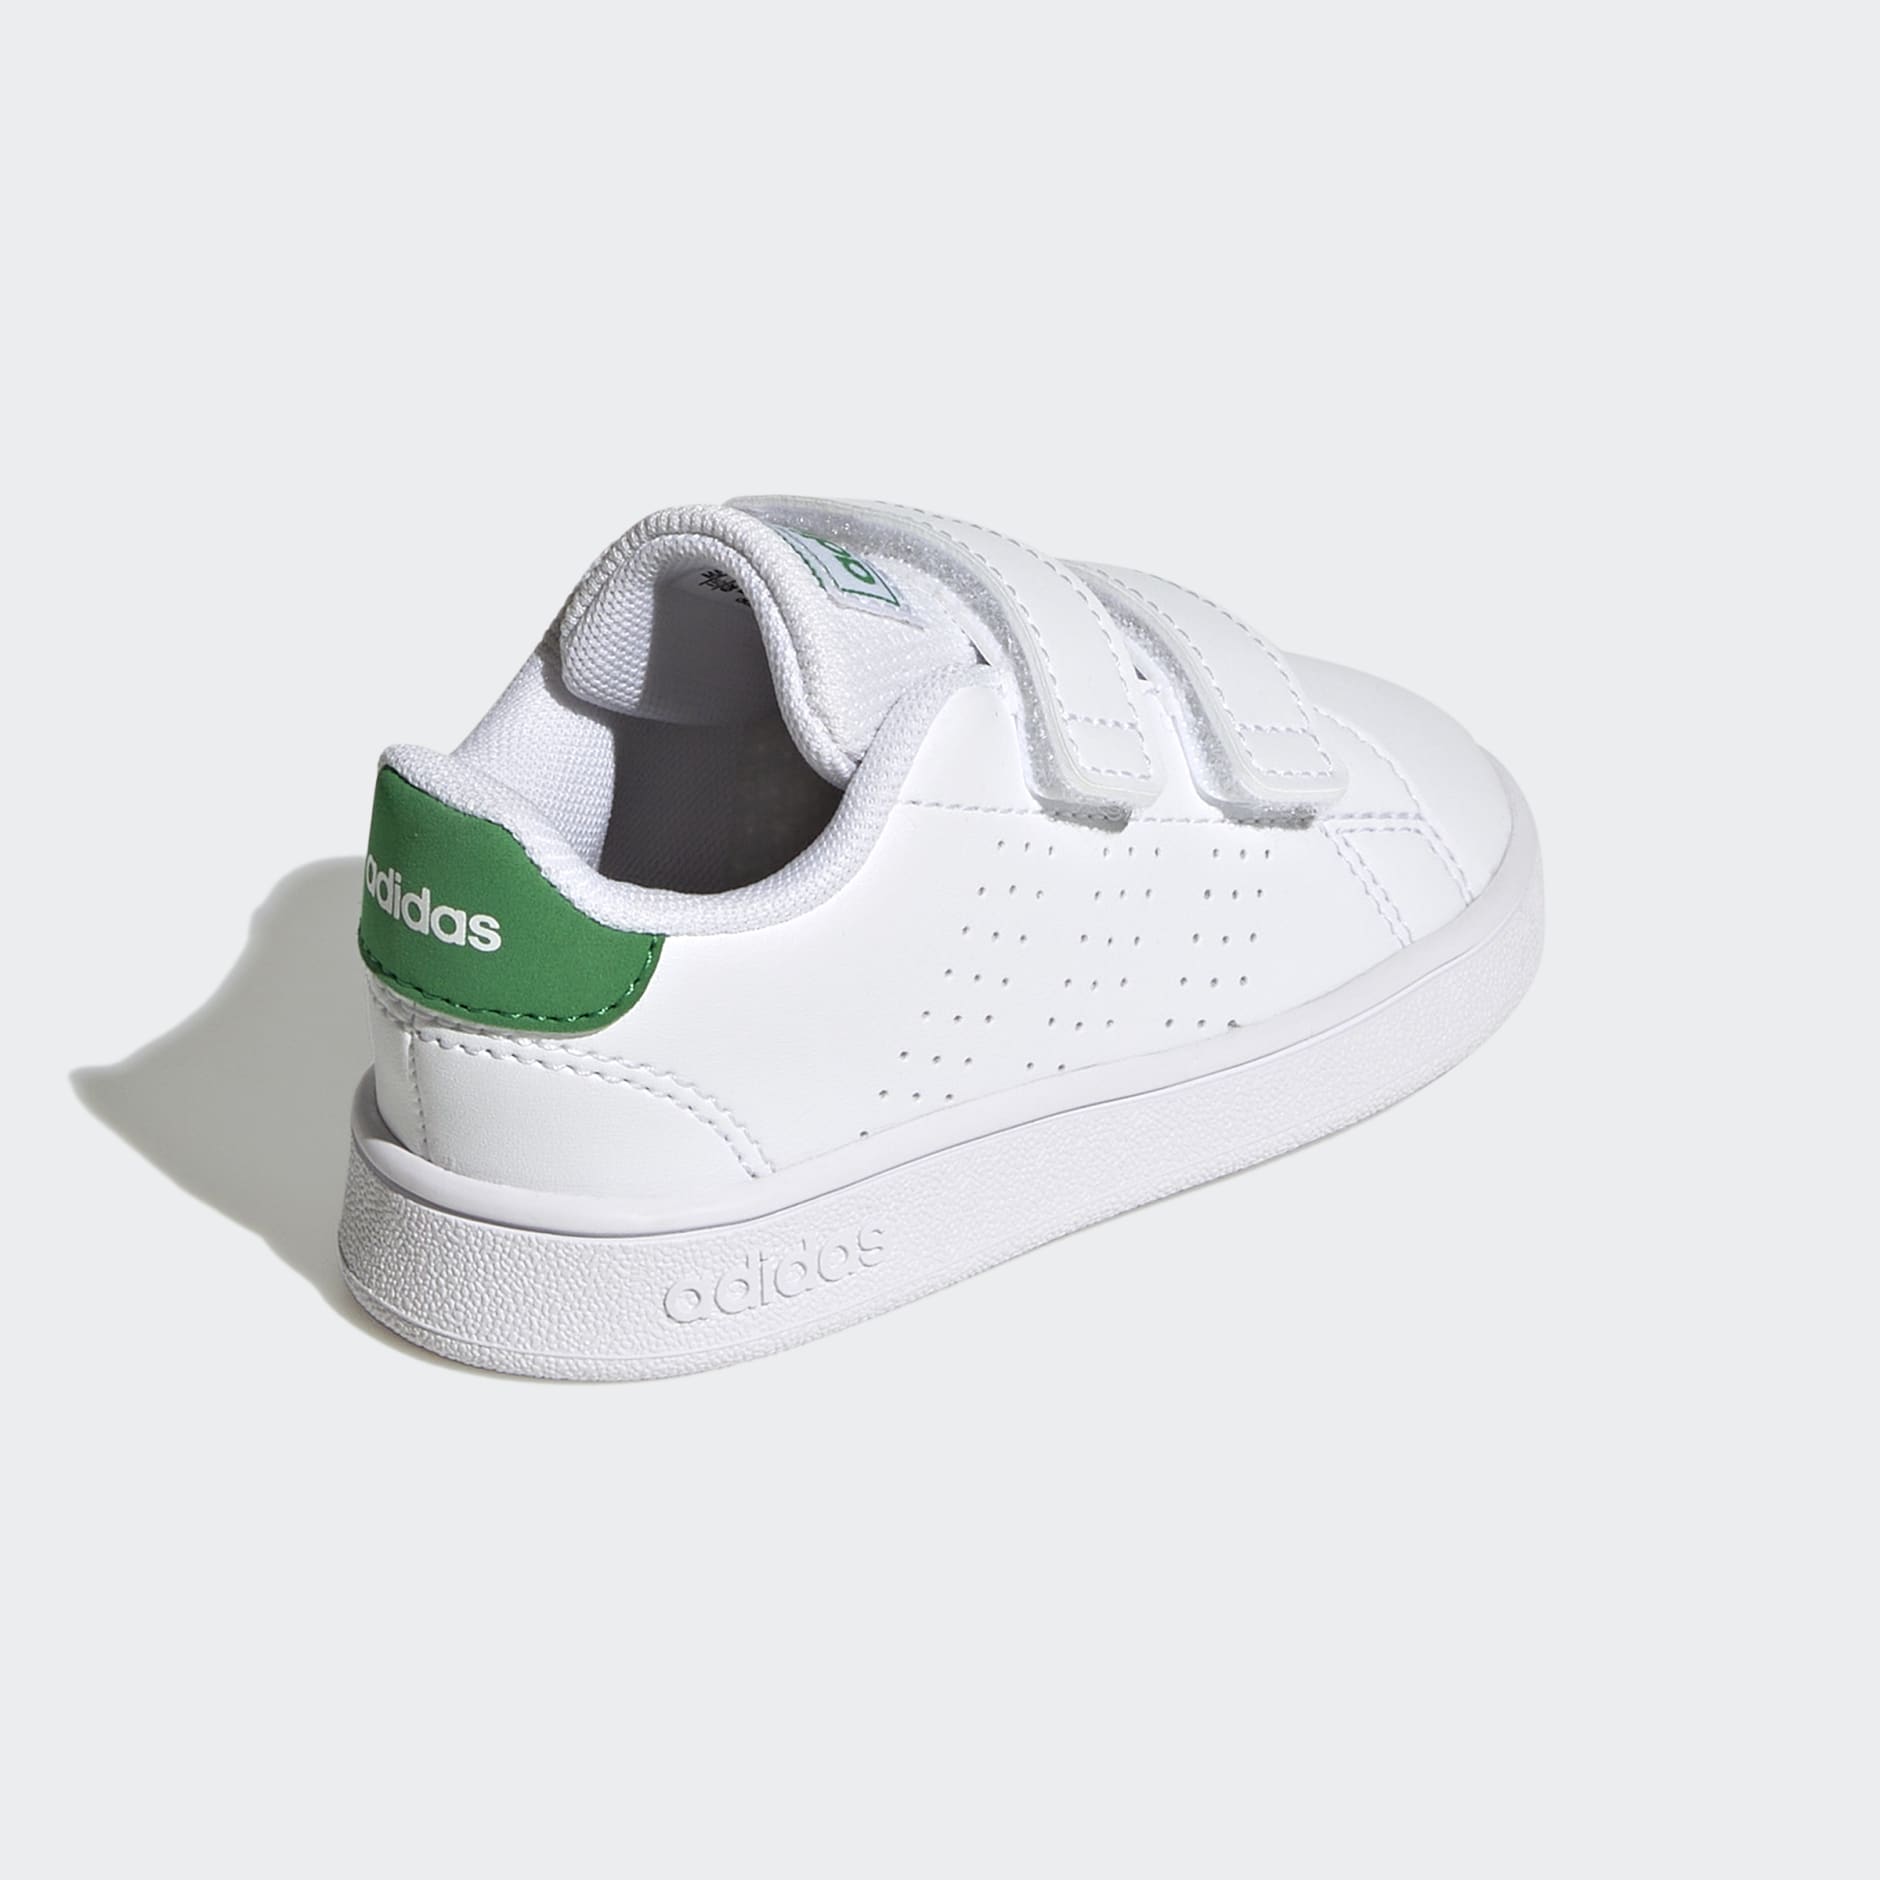 Lifestyle Hook-and-Loop | Advantage White LK Shoes adidas - Two adidas Court